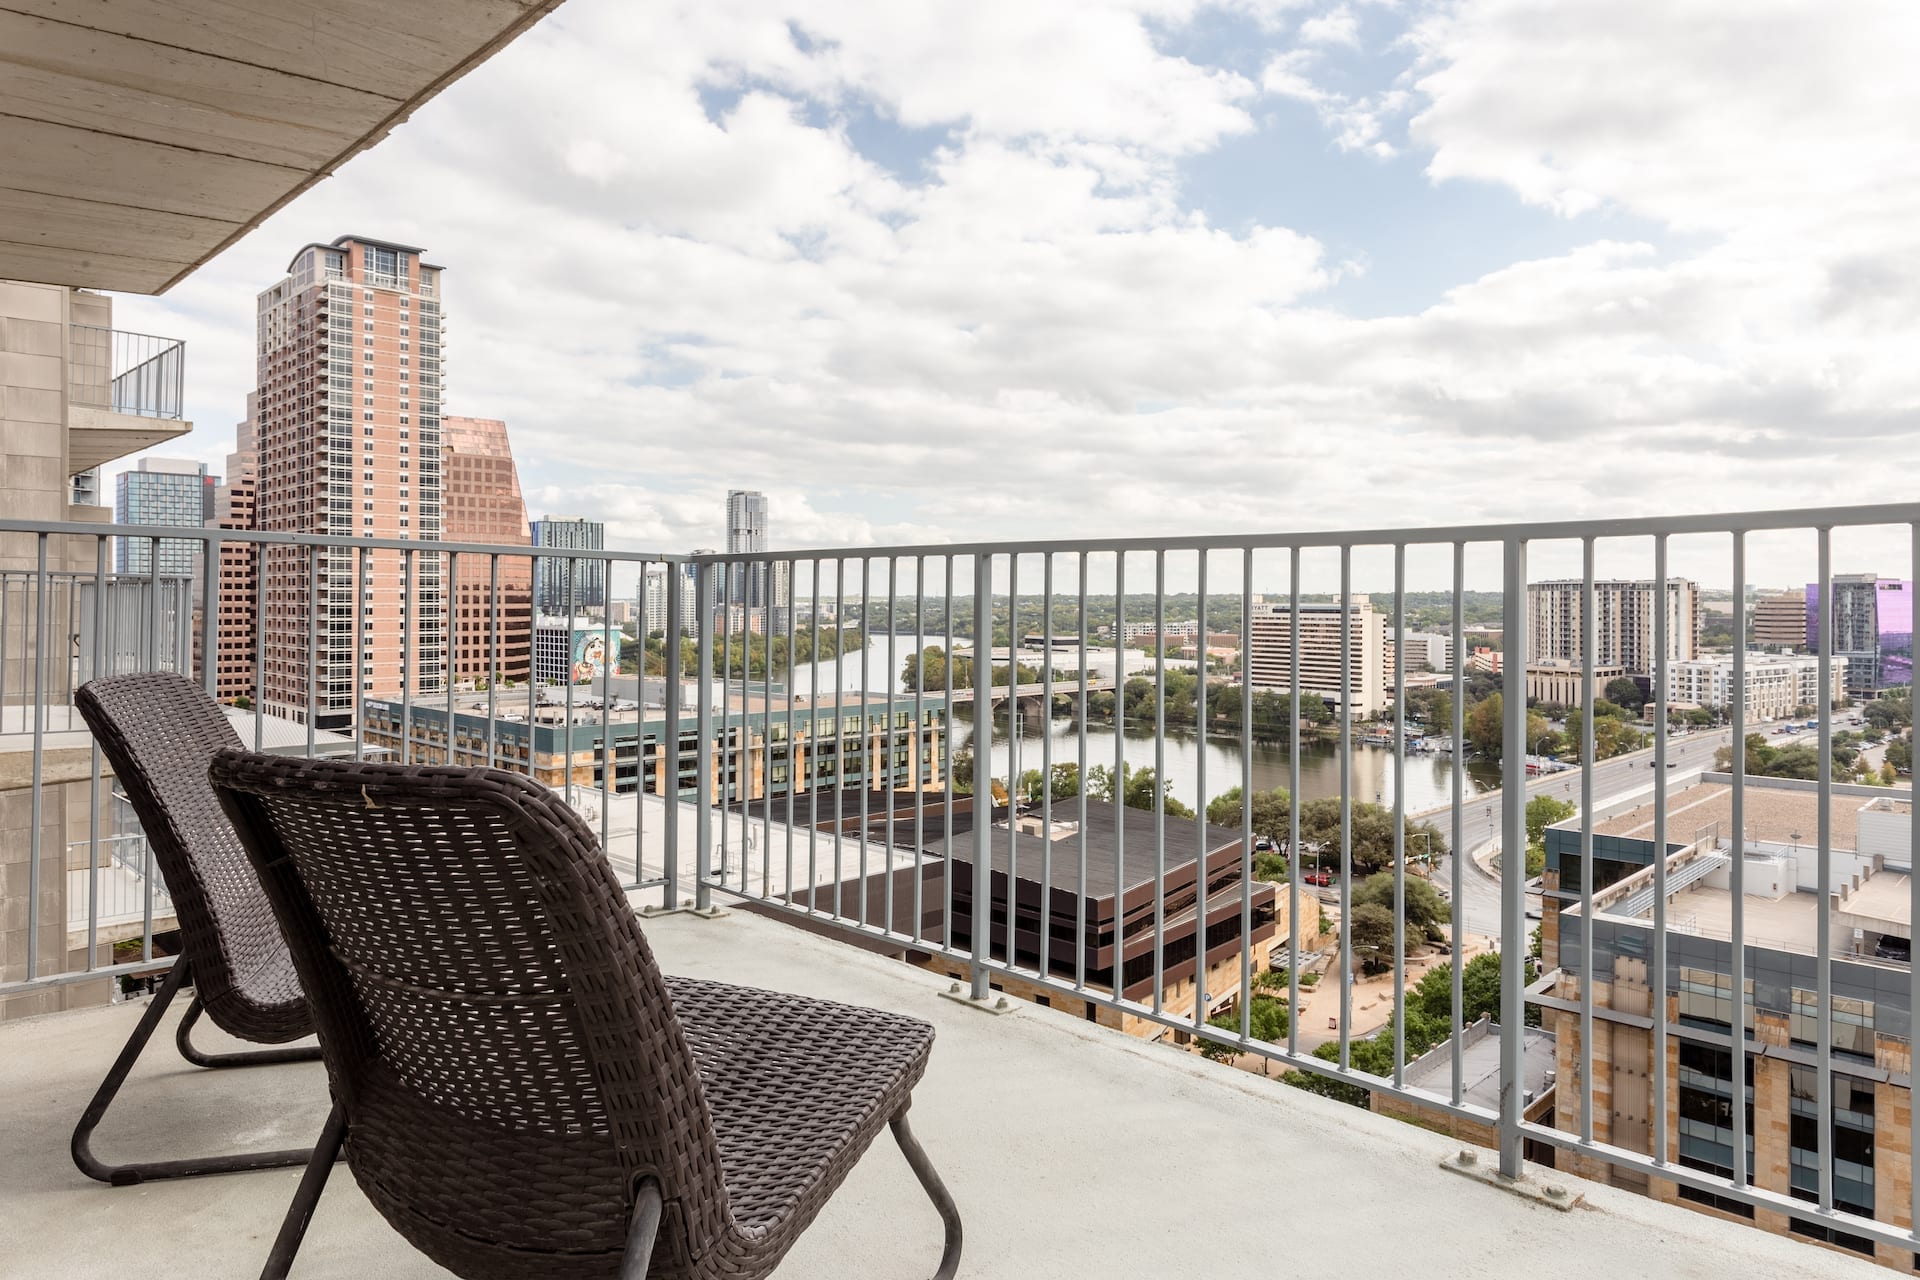 Property Image 2 - Hang out by the Pool or on Your Private Balcony | Austin 2nd Street